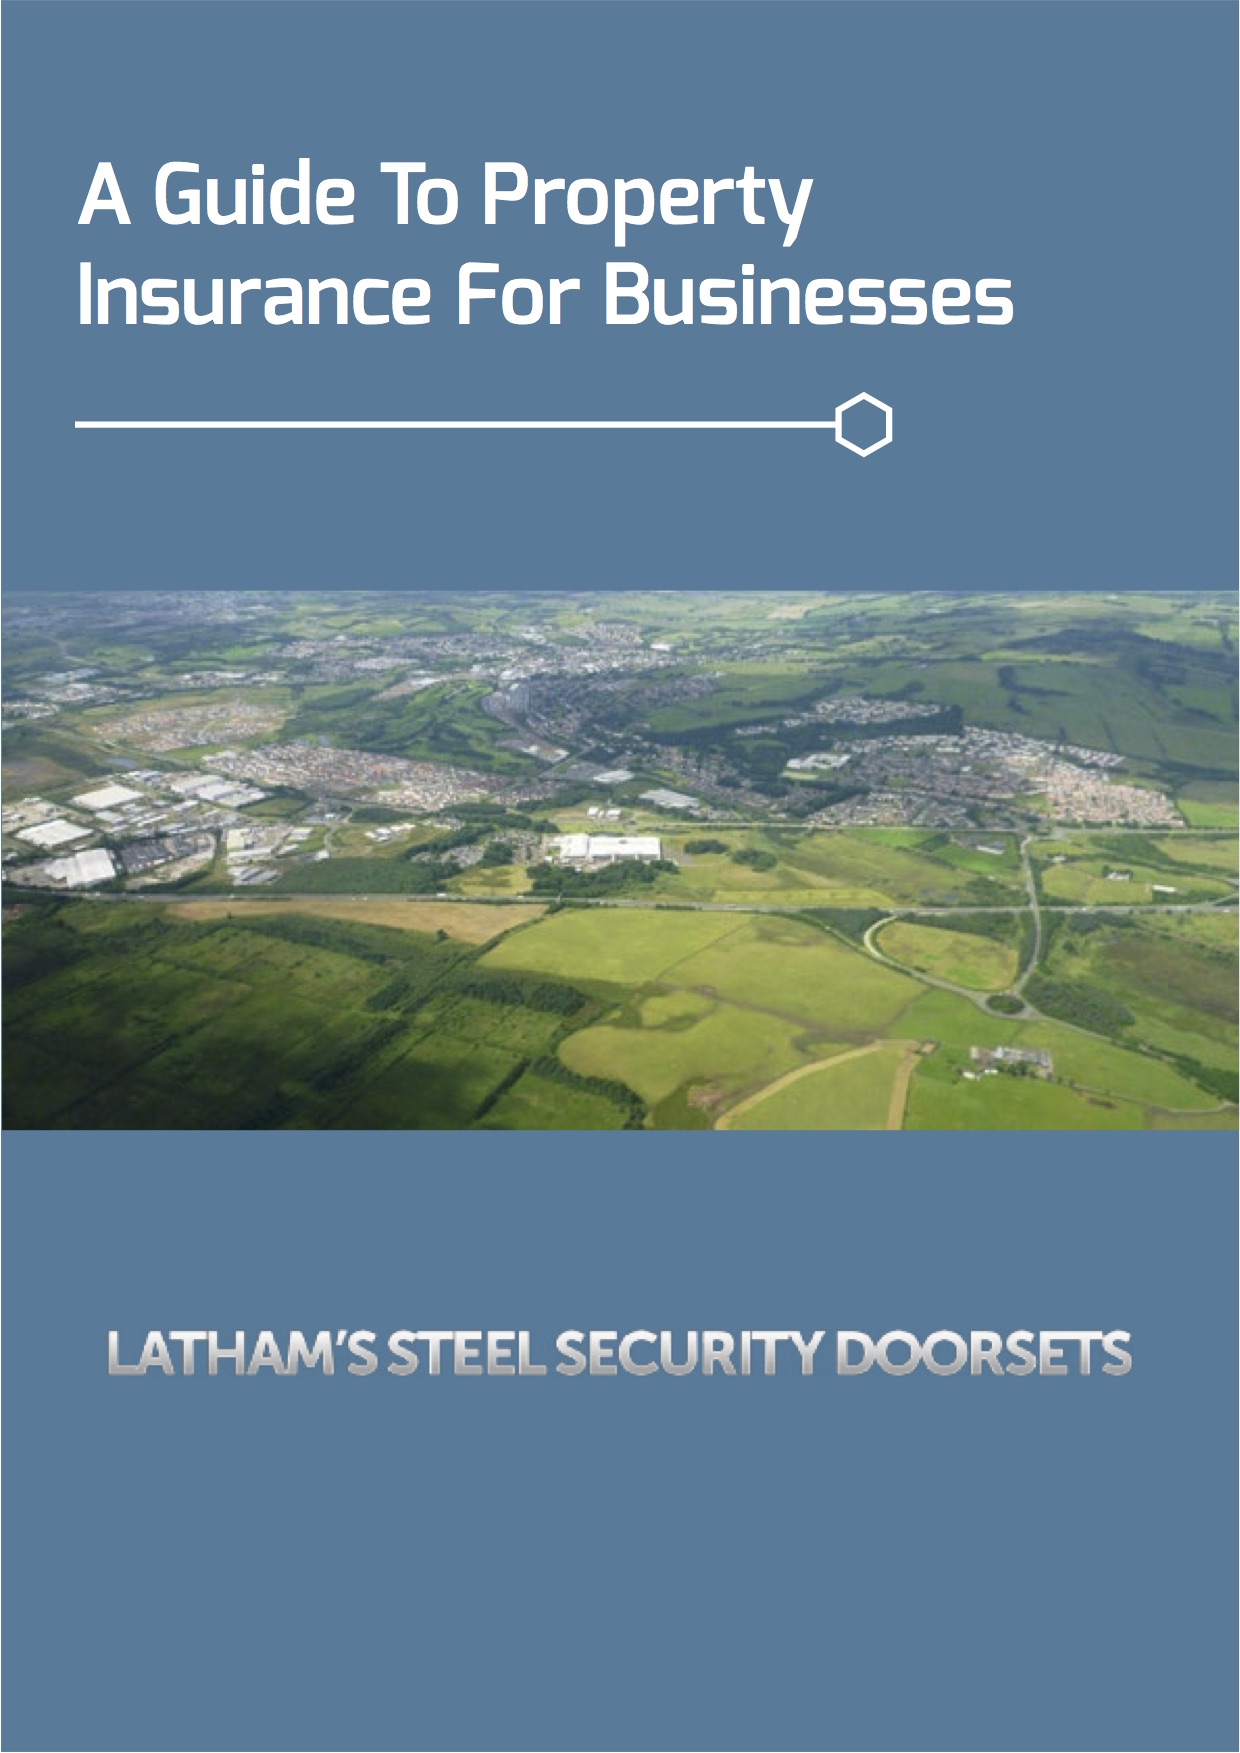 A guide to property business insurance screenshot with aerial photo of landscape